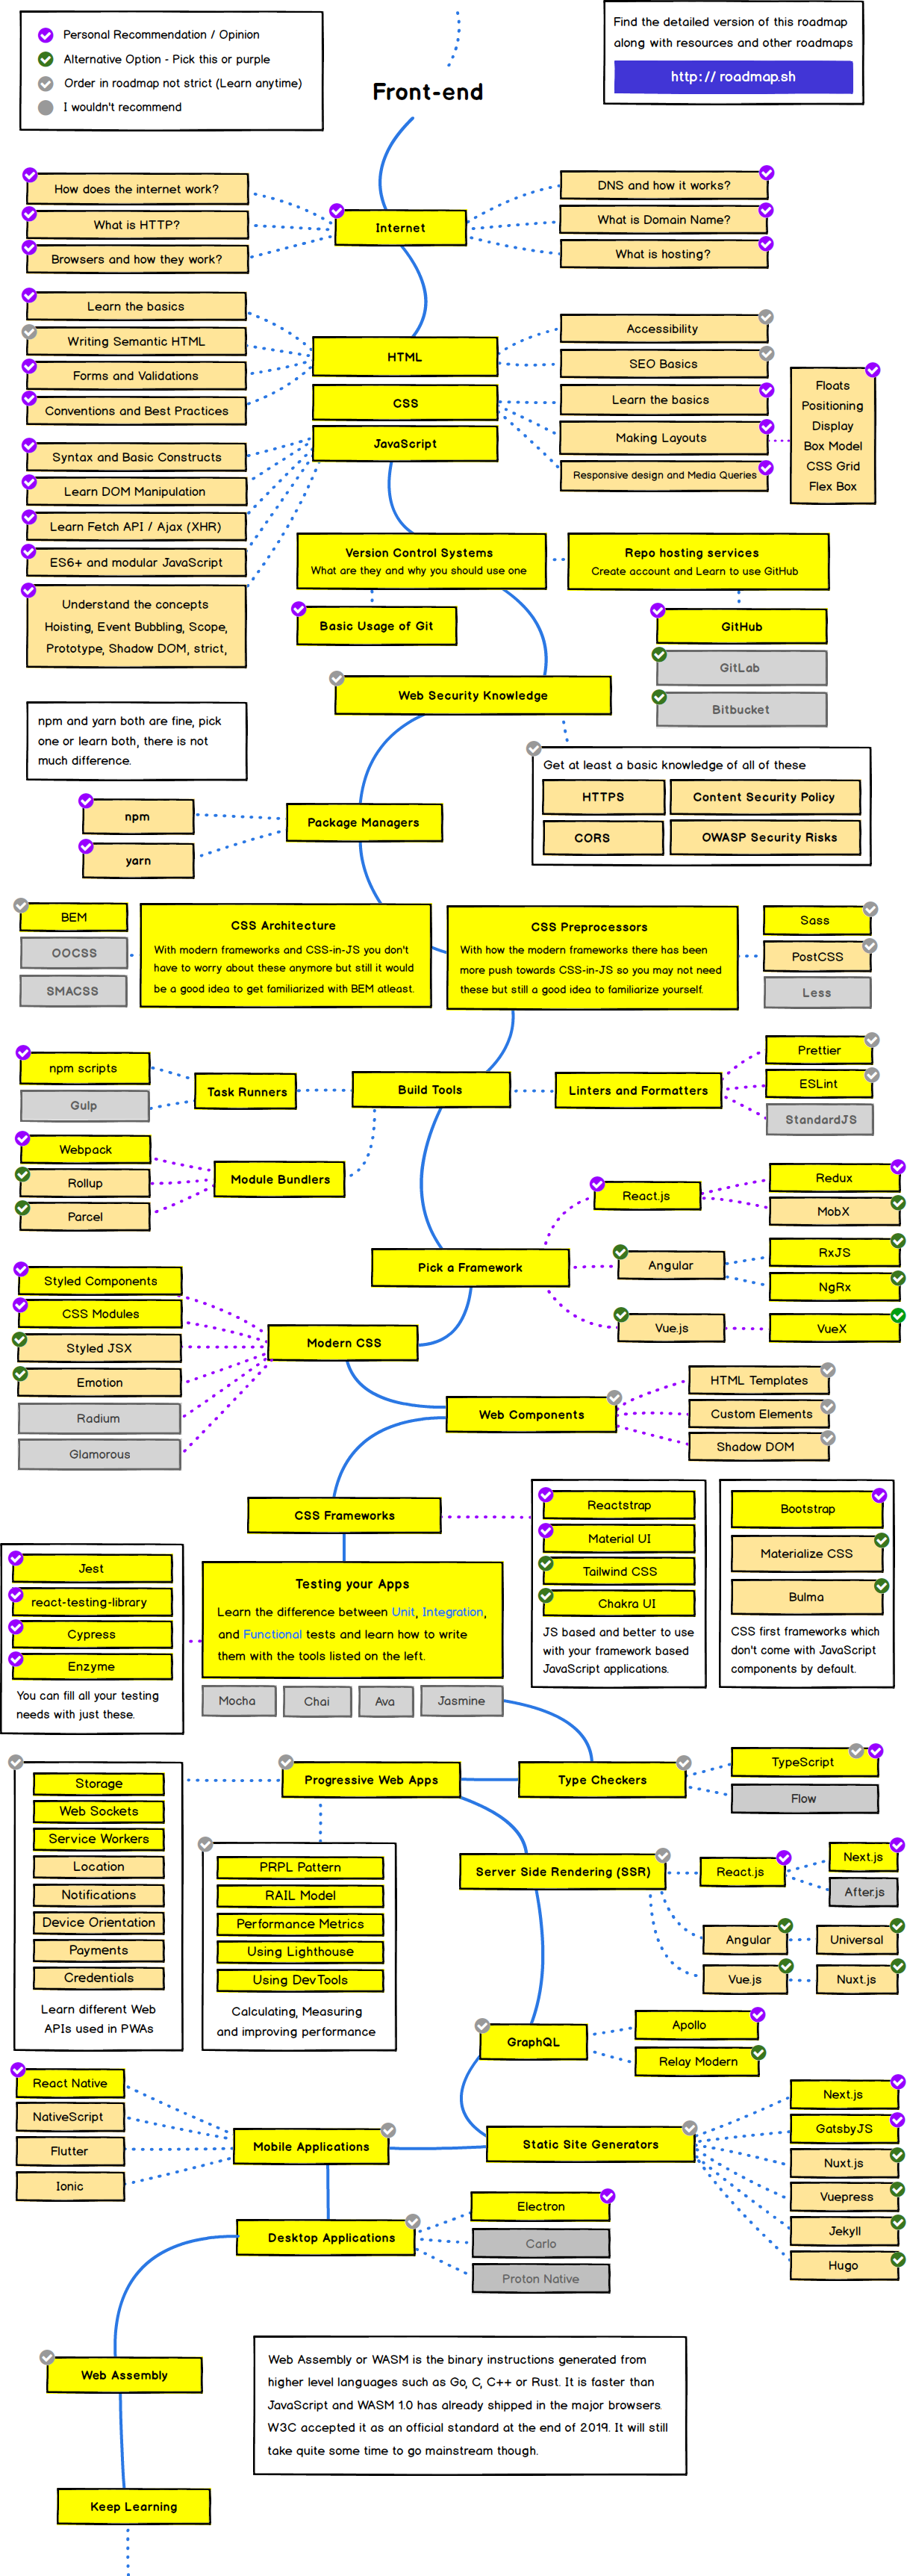 Frontend Road Map for web developers esp. frontend web design -frontend.png